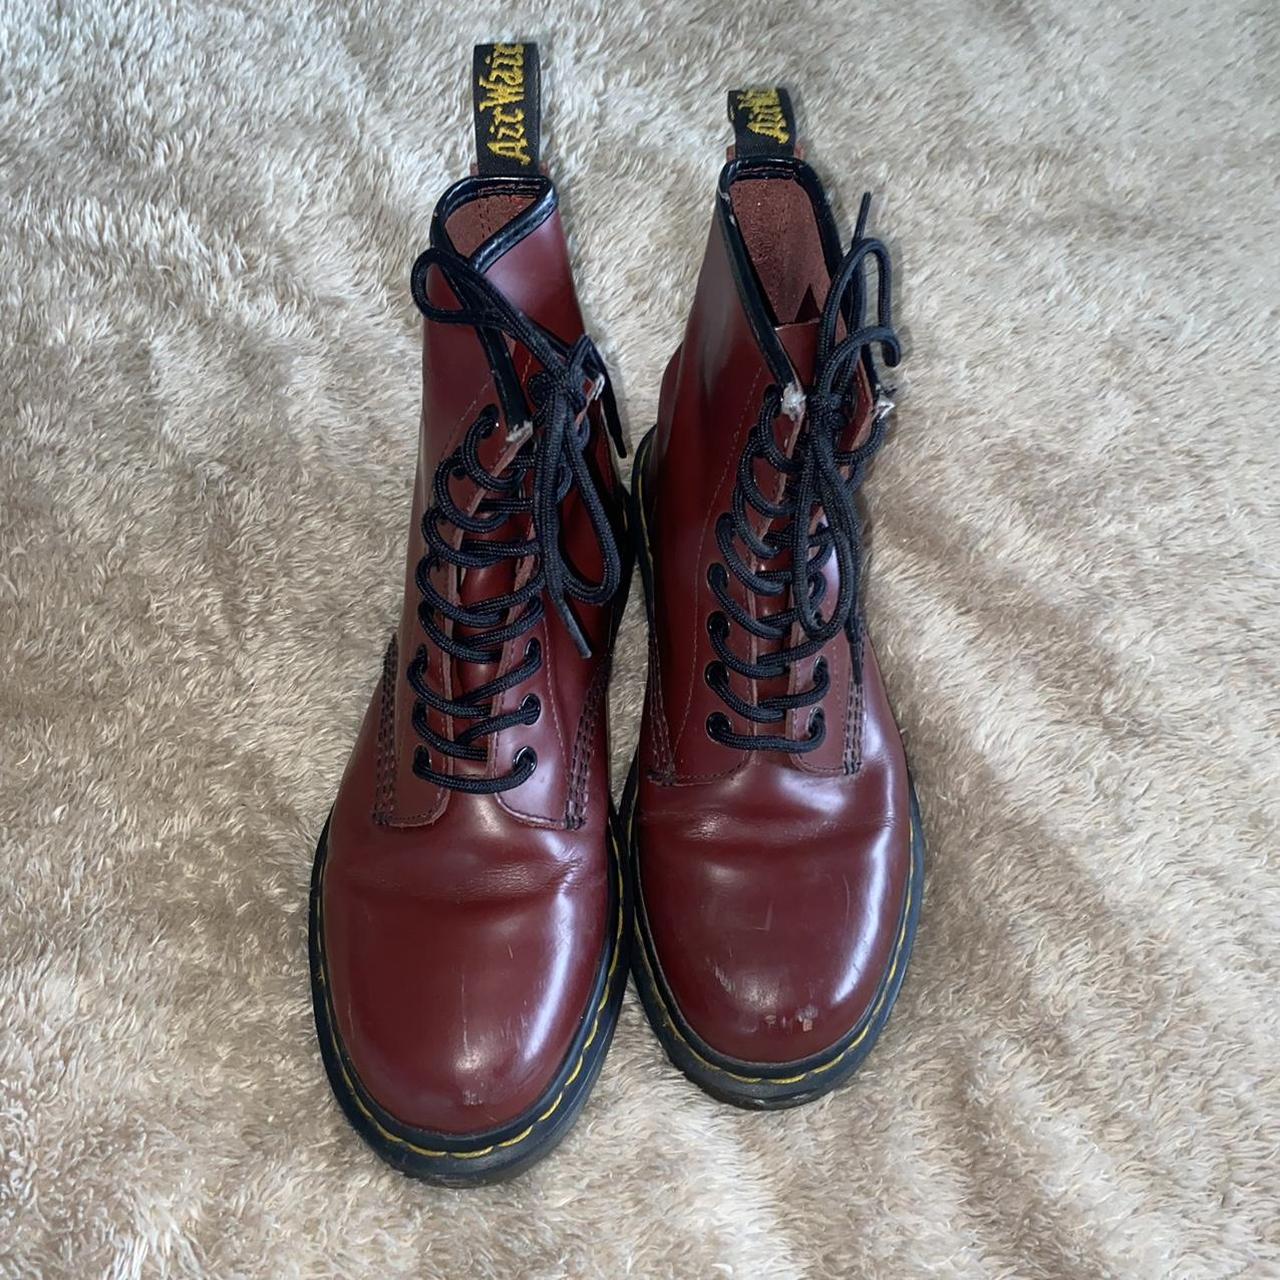 Maroon Doc Martens 1460 Cherry Smooth Leather 🍒... - Depop